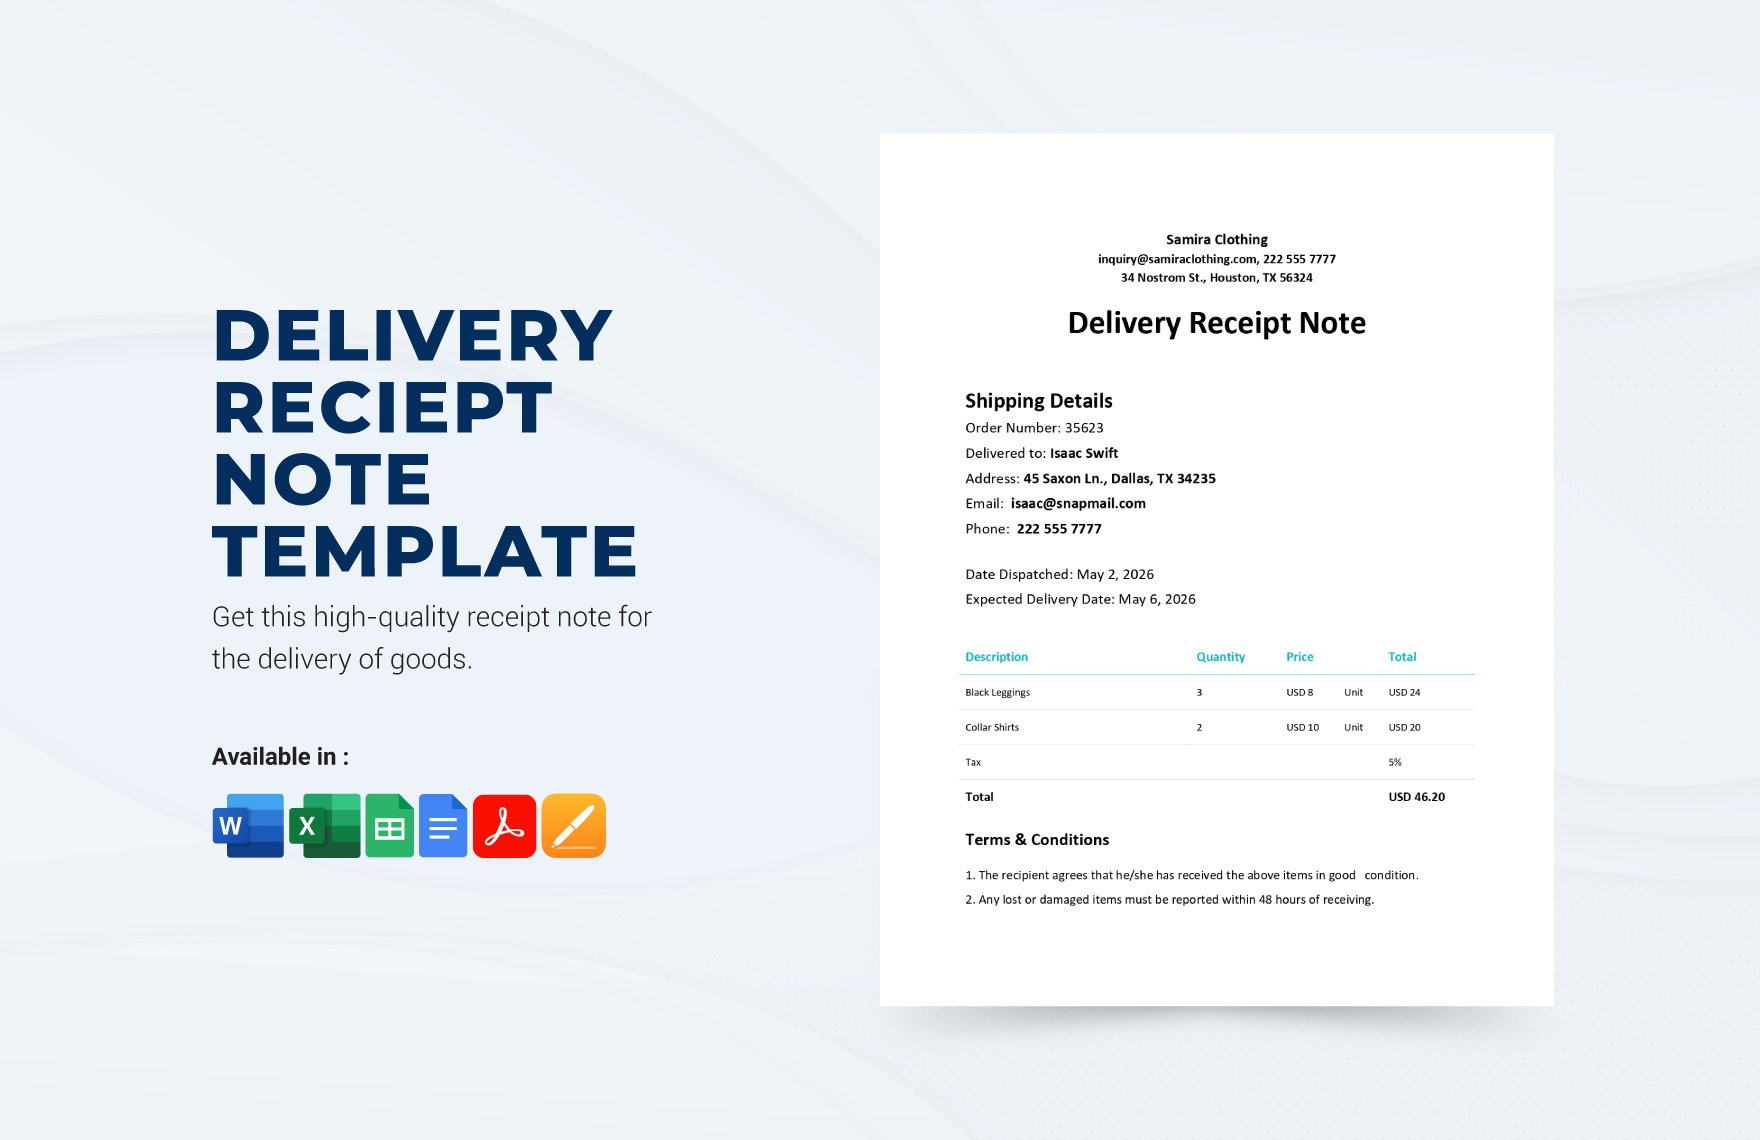 Delivery Receipt Note Template